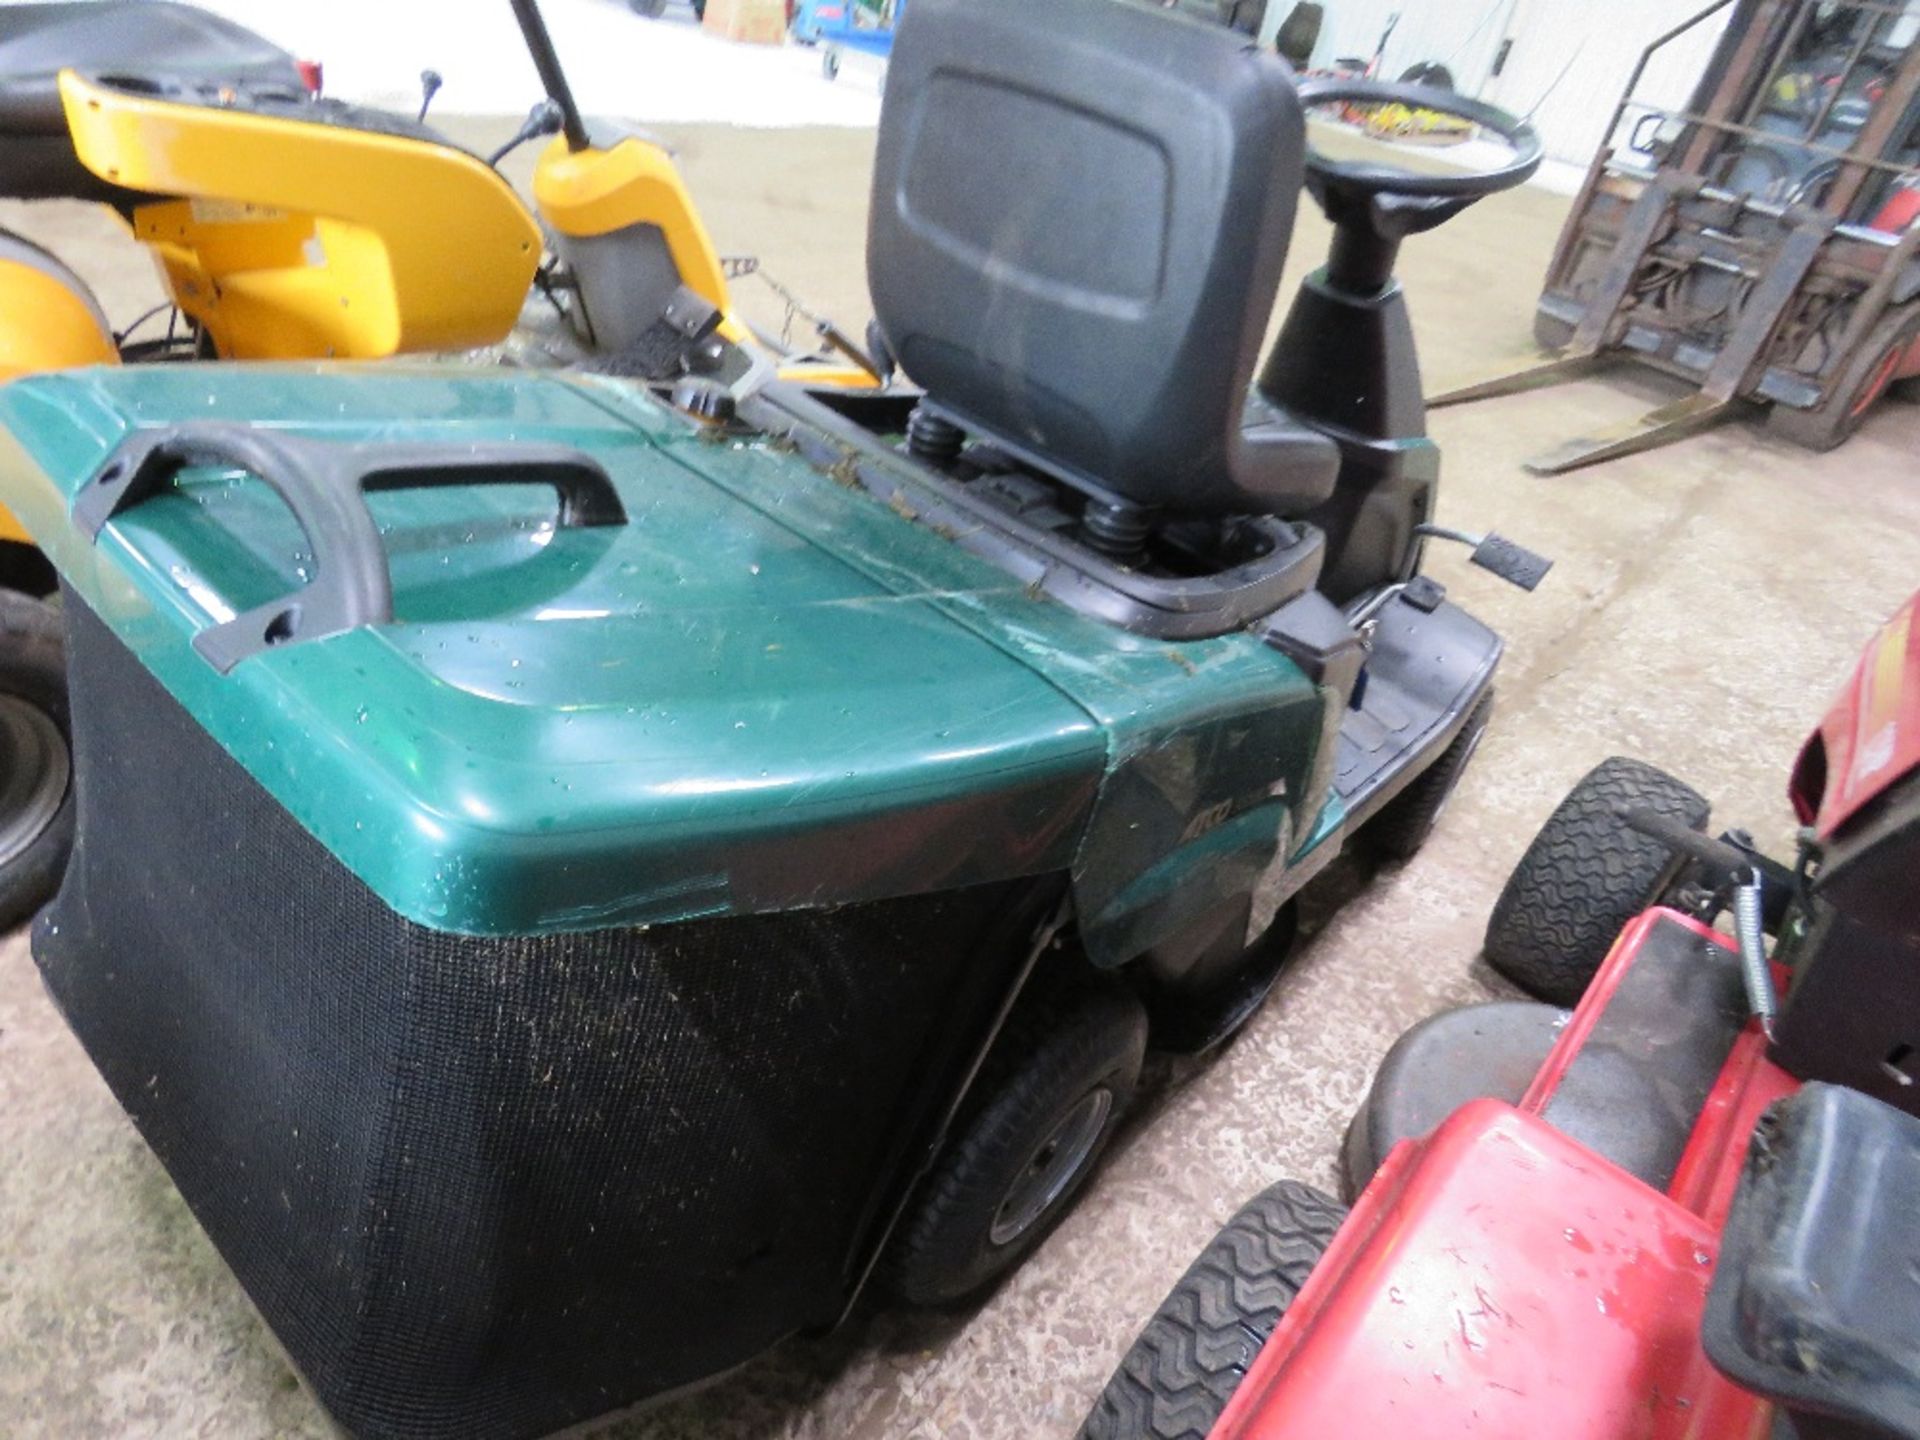 ATCO RIDER RIDE ON MOWER WITH COLLECTOR. WHEN BRIEFLY TESTED WAS SEEN TO RUN, DRIVE AND MOWERS ENGAG - Image 5 of 6